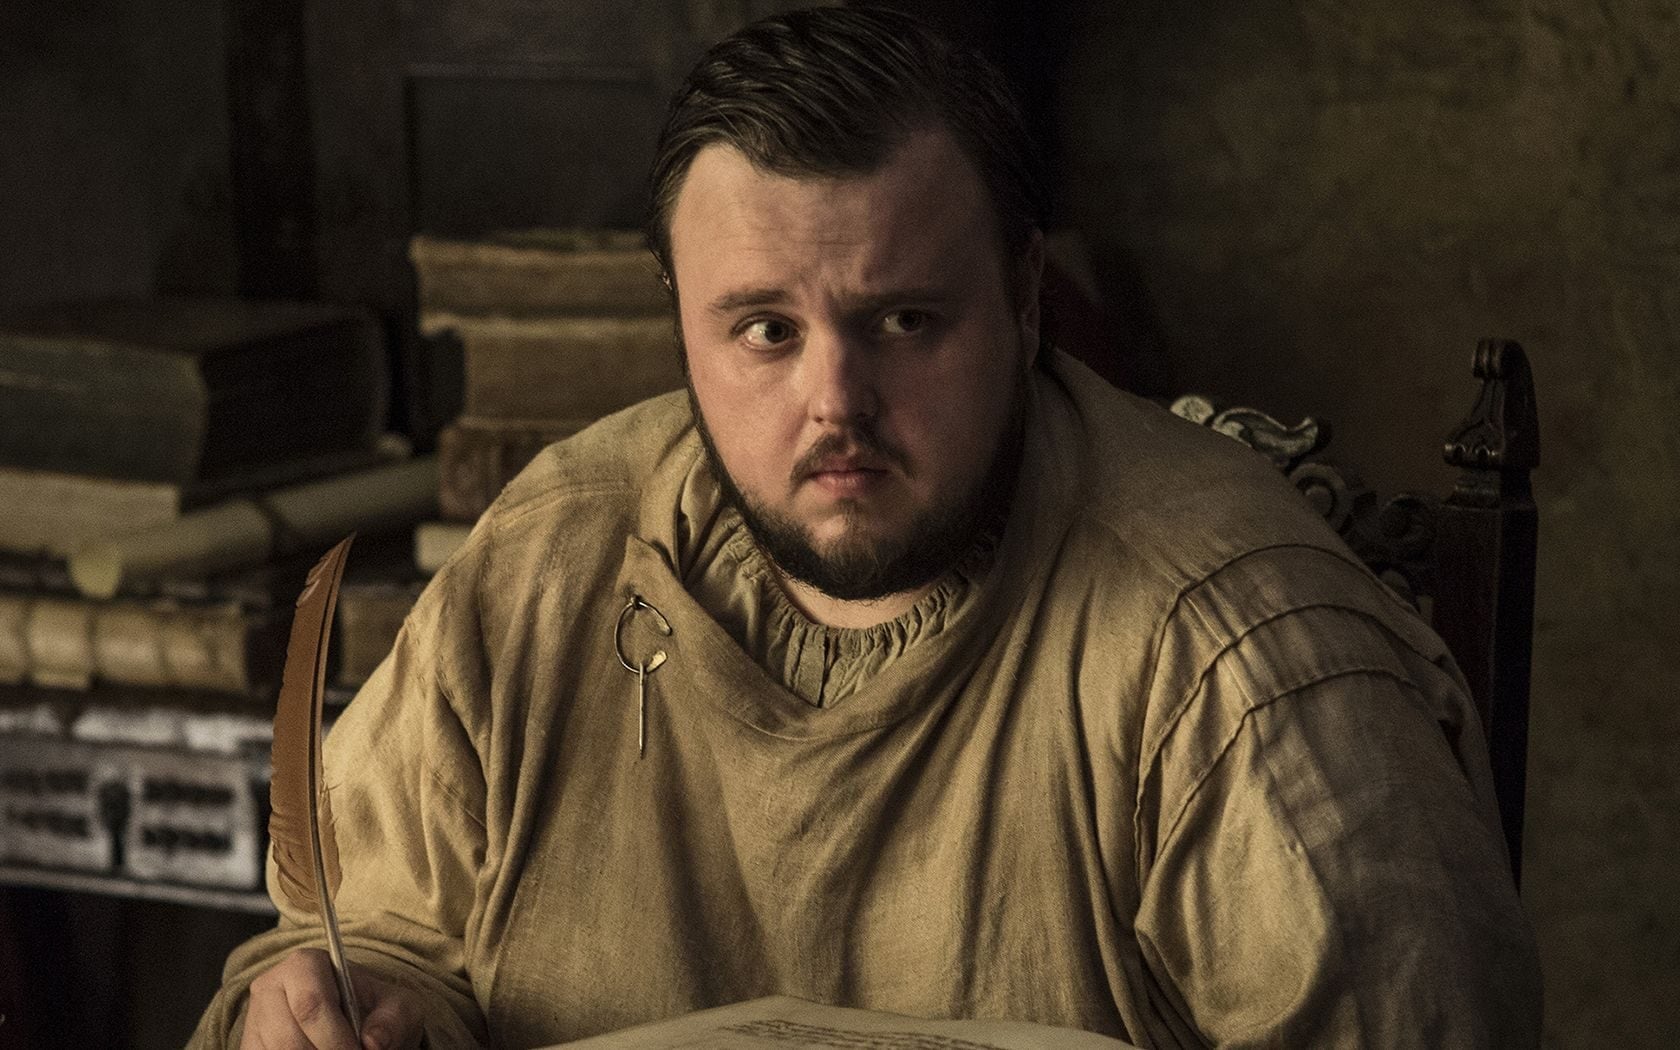 Why Samwell Tarly is the Neville Longbottom of Game of Thrones